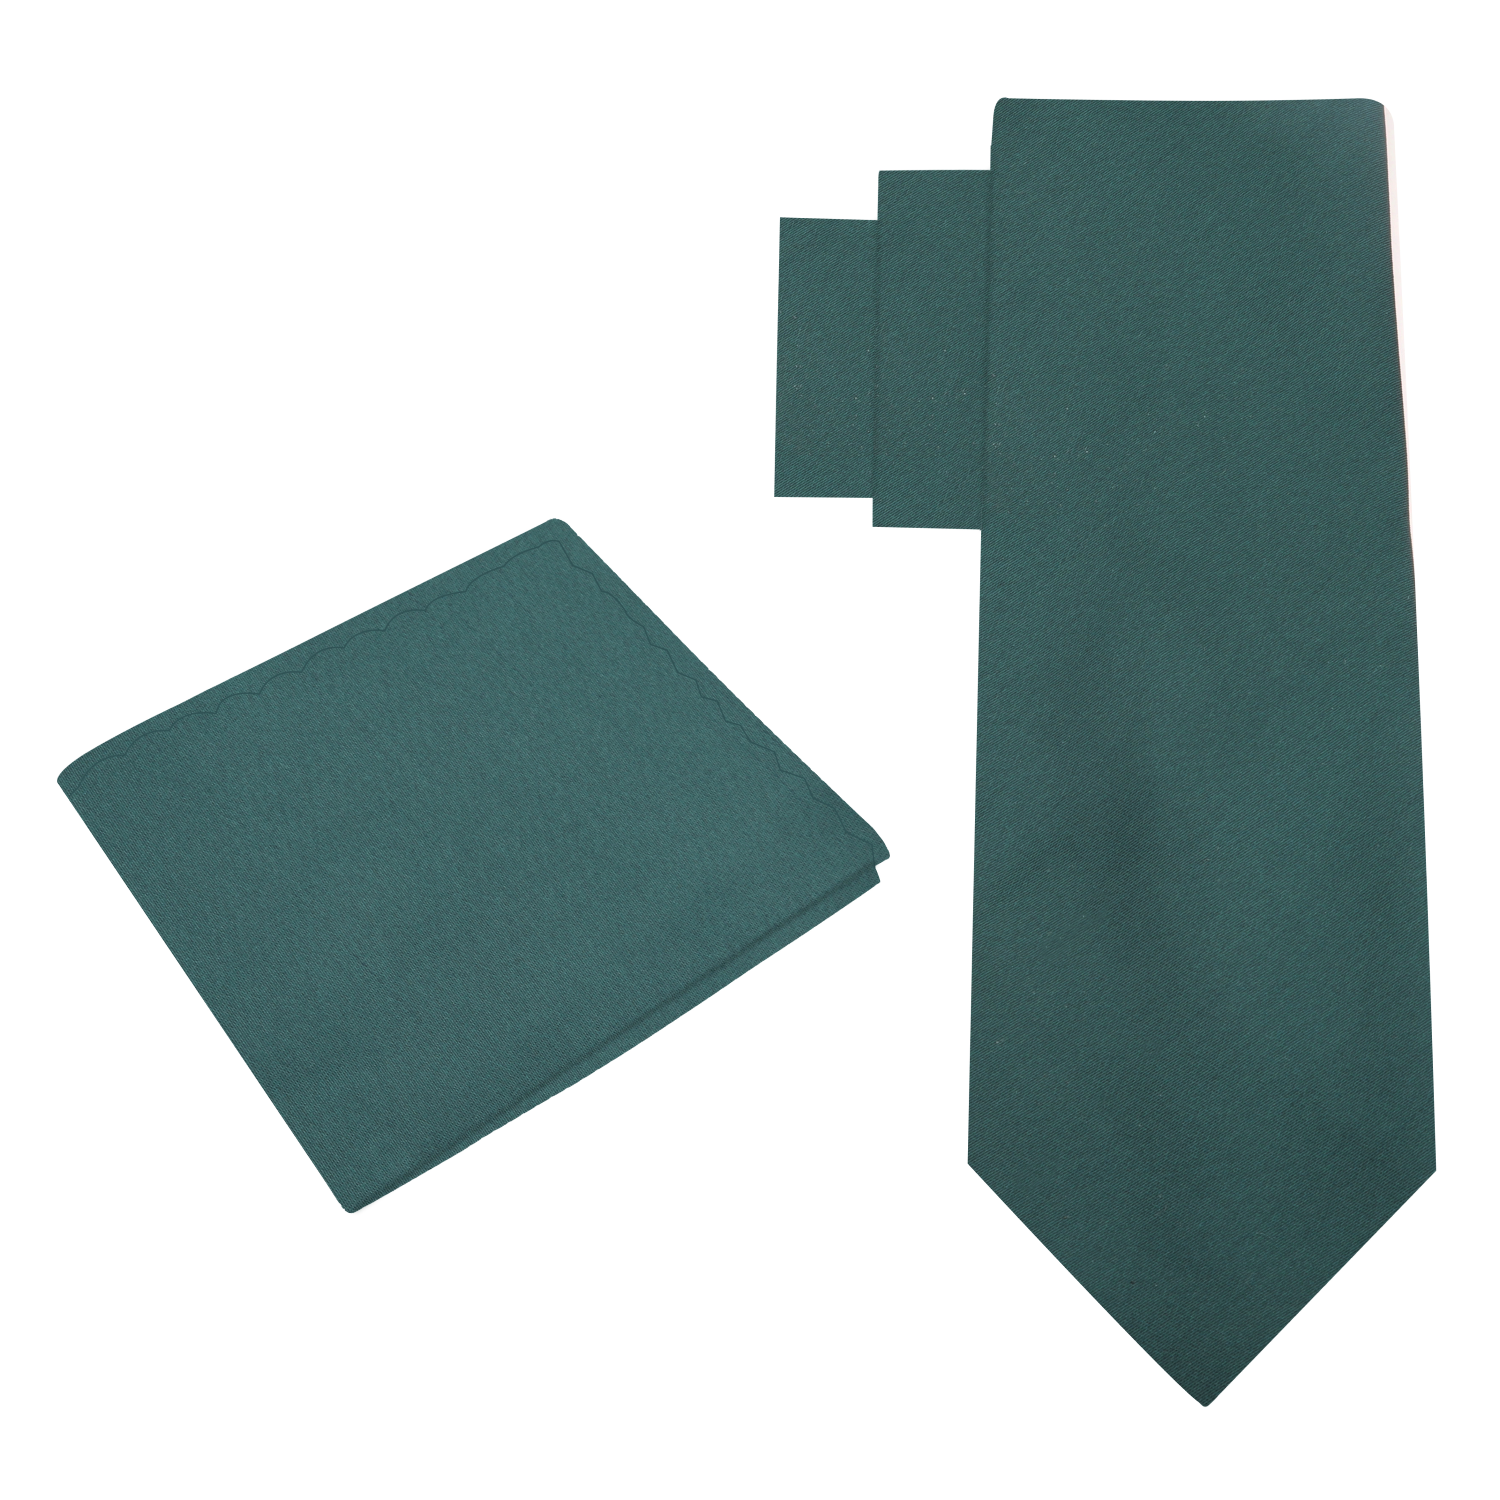 Alt View: Solid Forest Green Necktie and Accenting Blue and Square